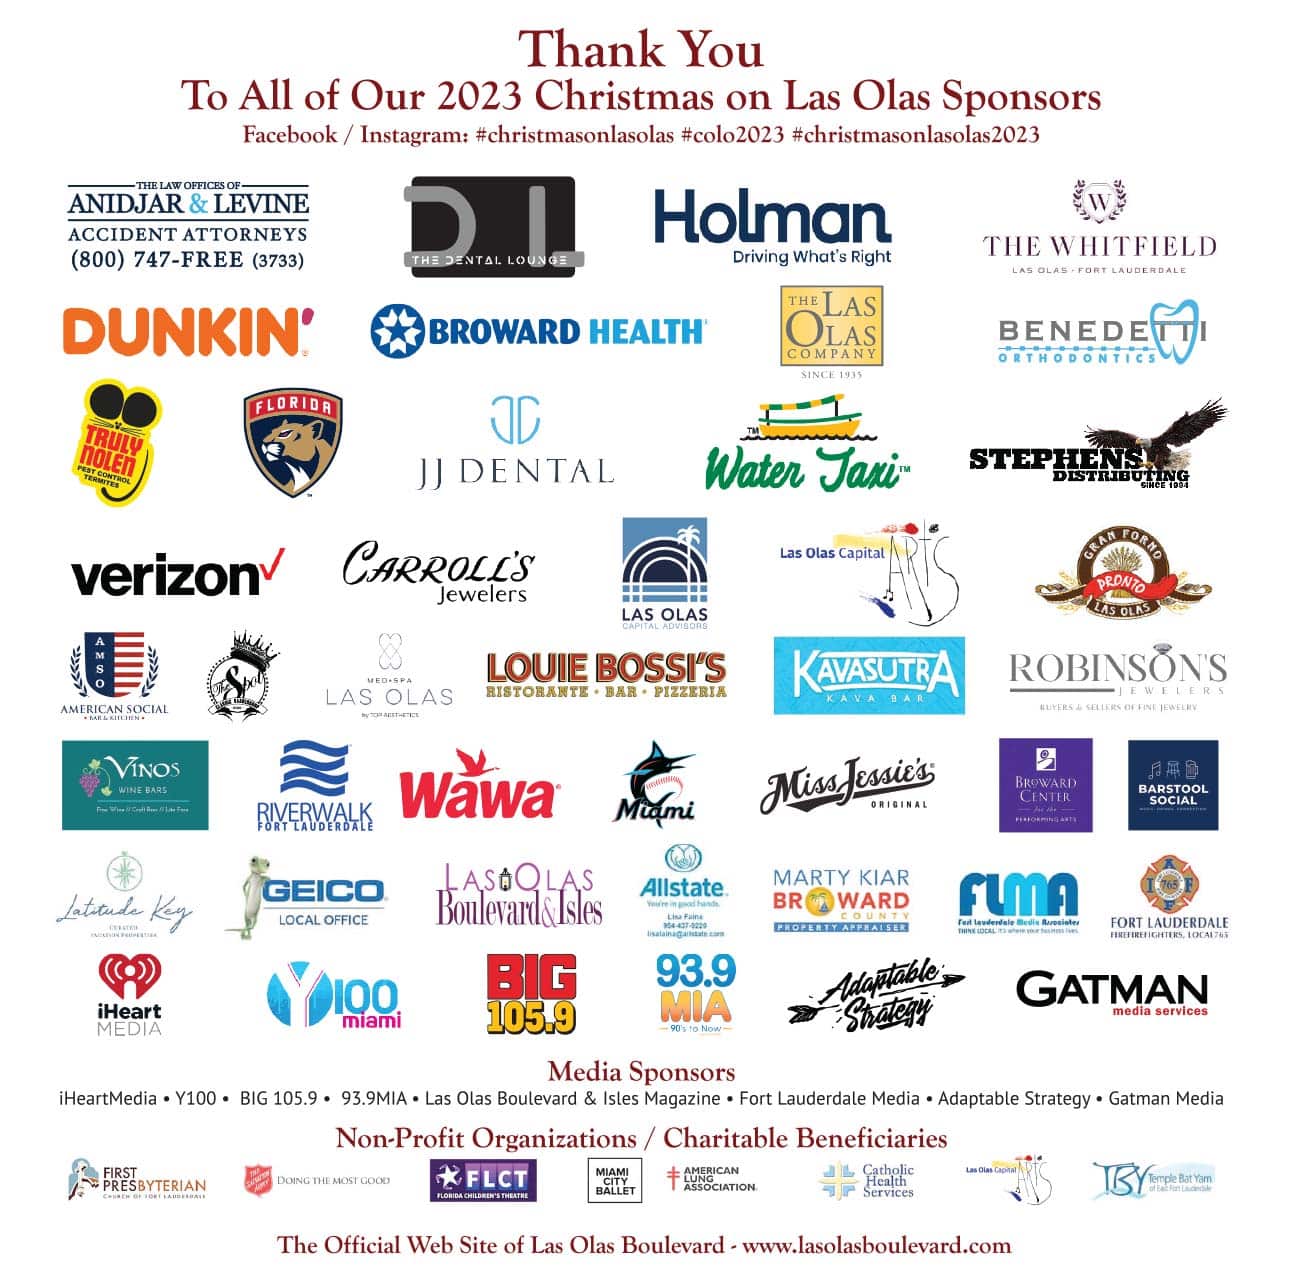 Thank You to All of Our 2023 Christmas on Las Olas Sponsors & Vendors